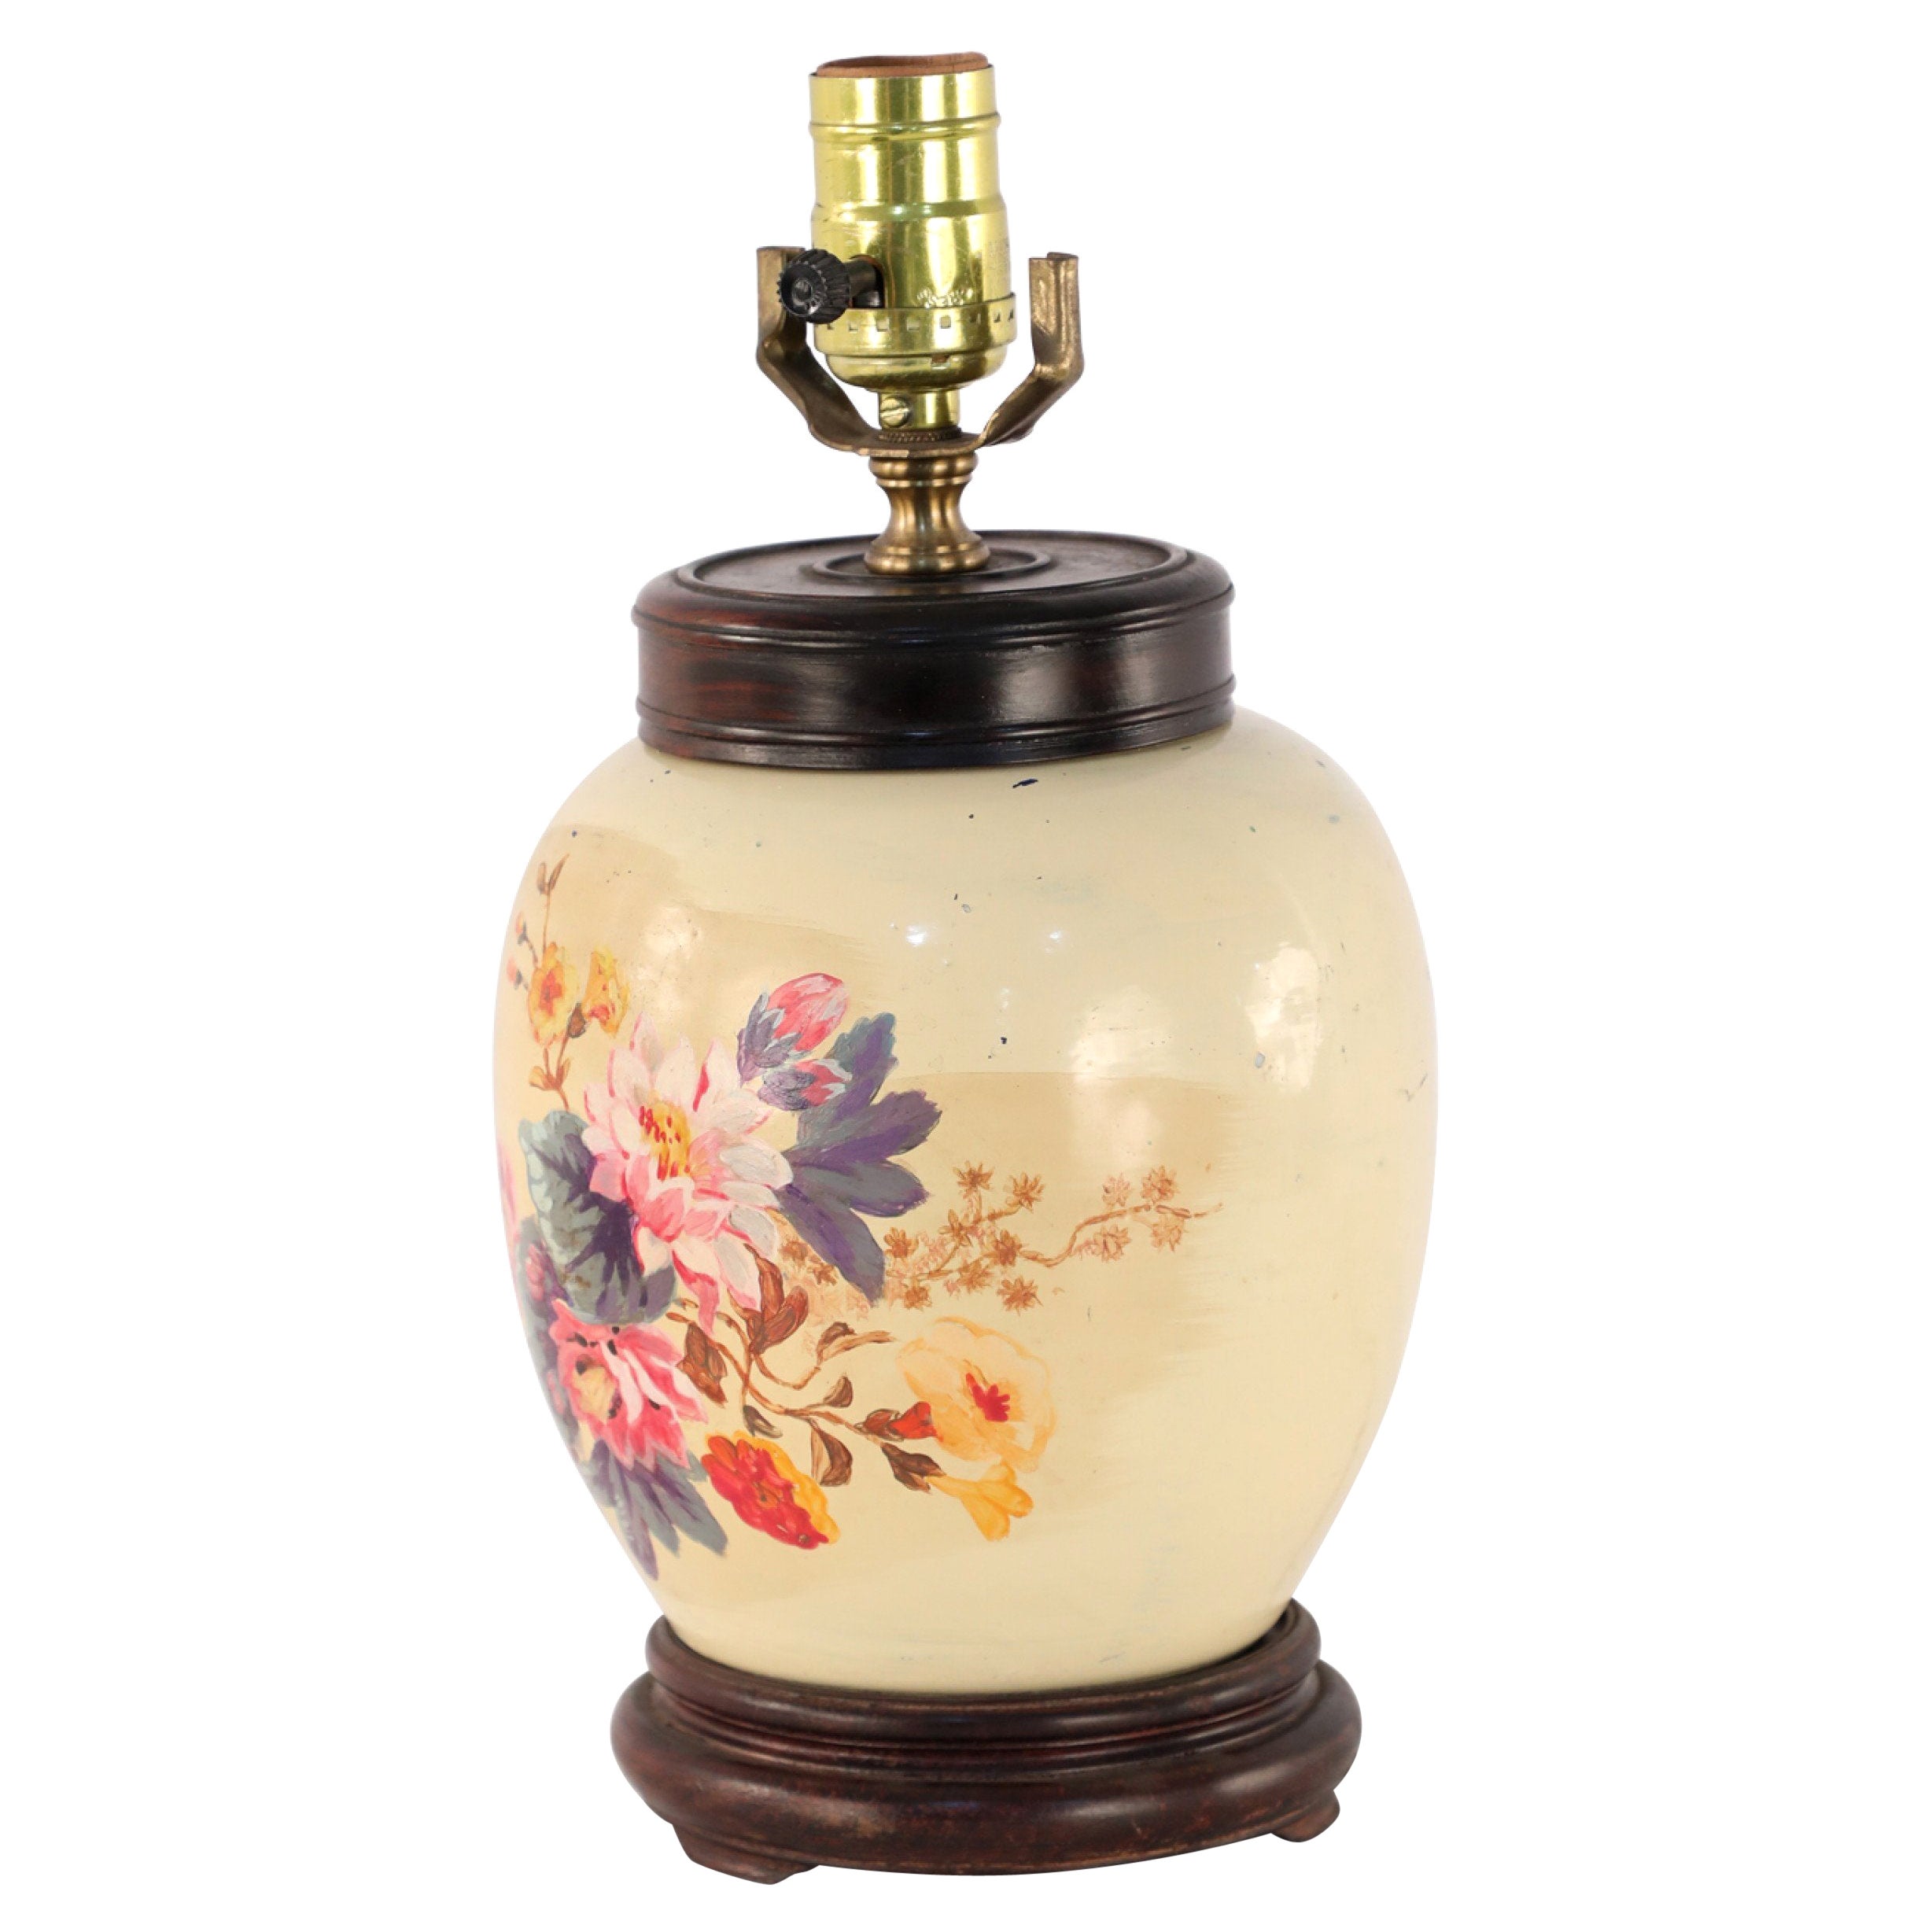 Chinese Pale Yellow and Colorful Floral Porcelain Table Lamp